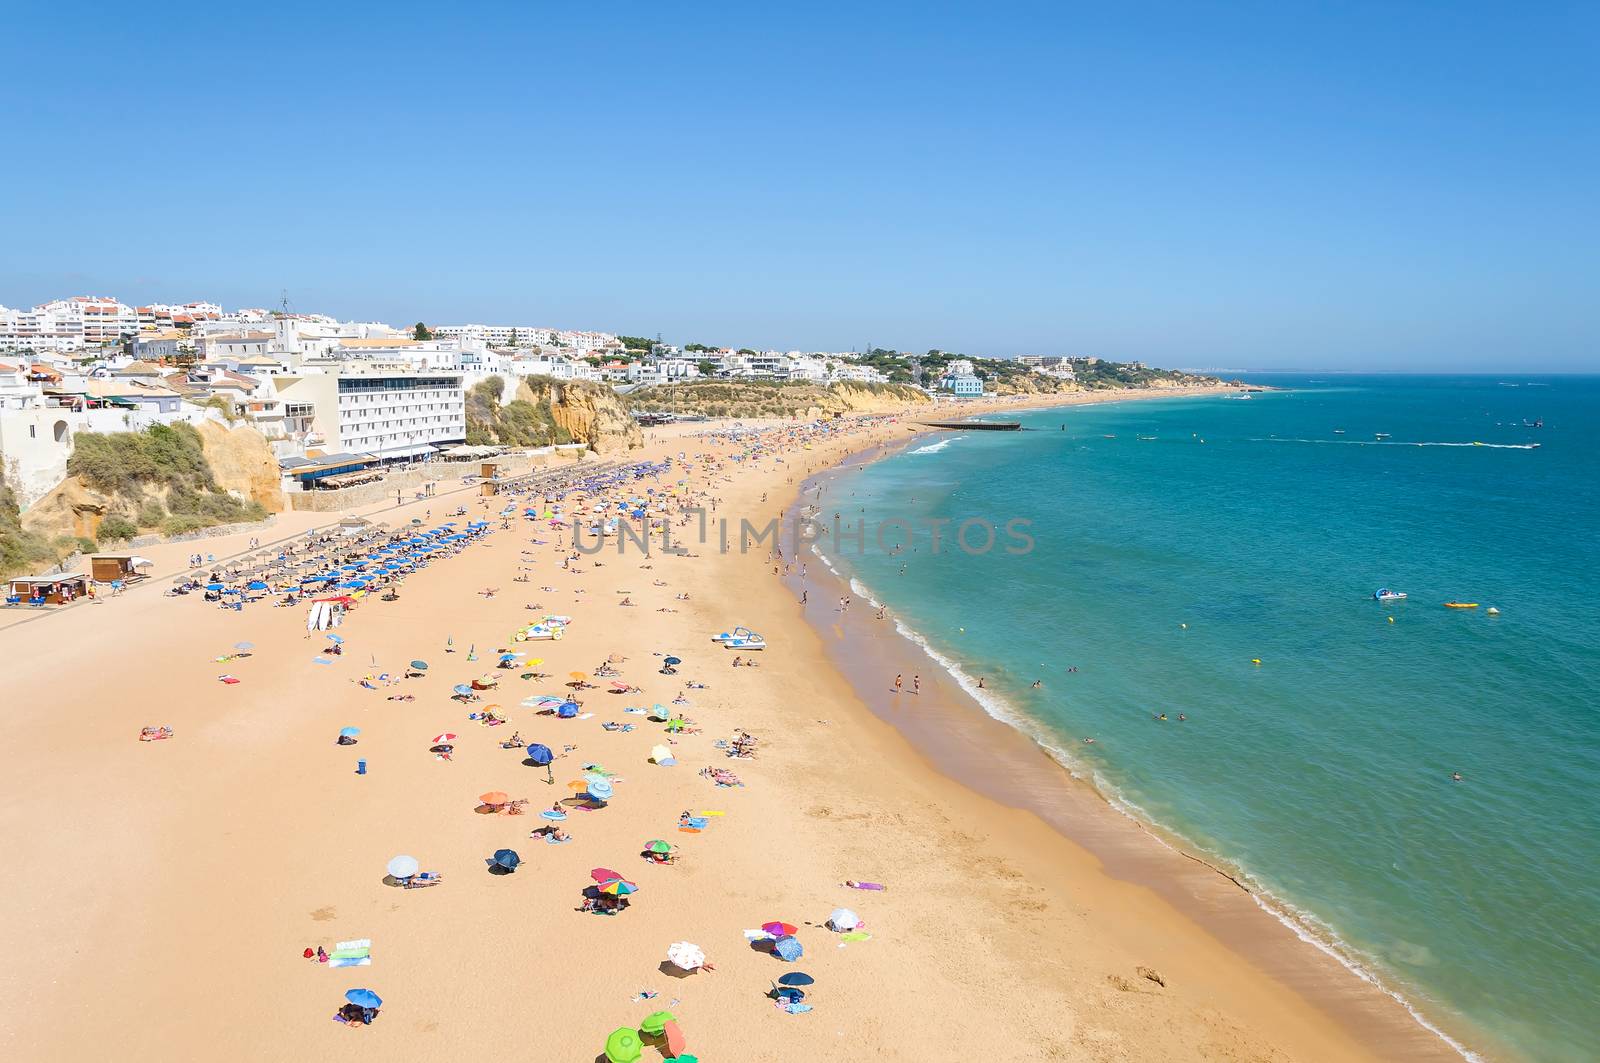 View of crowded beach in Albufeira in Portugal by mkos83